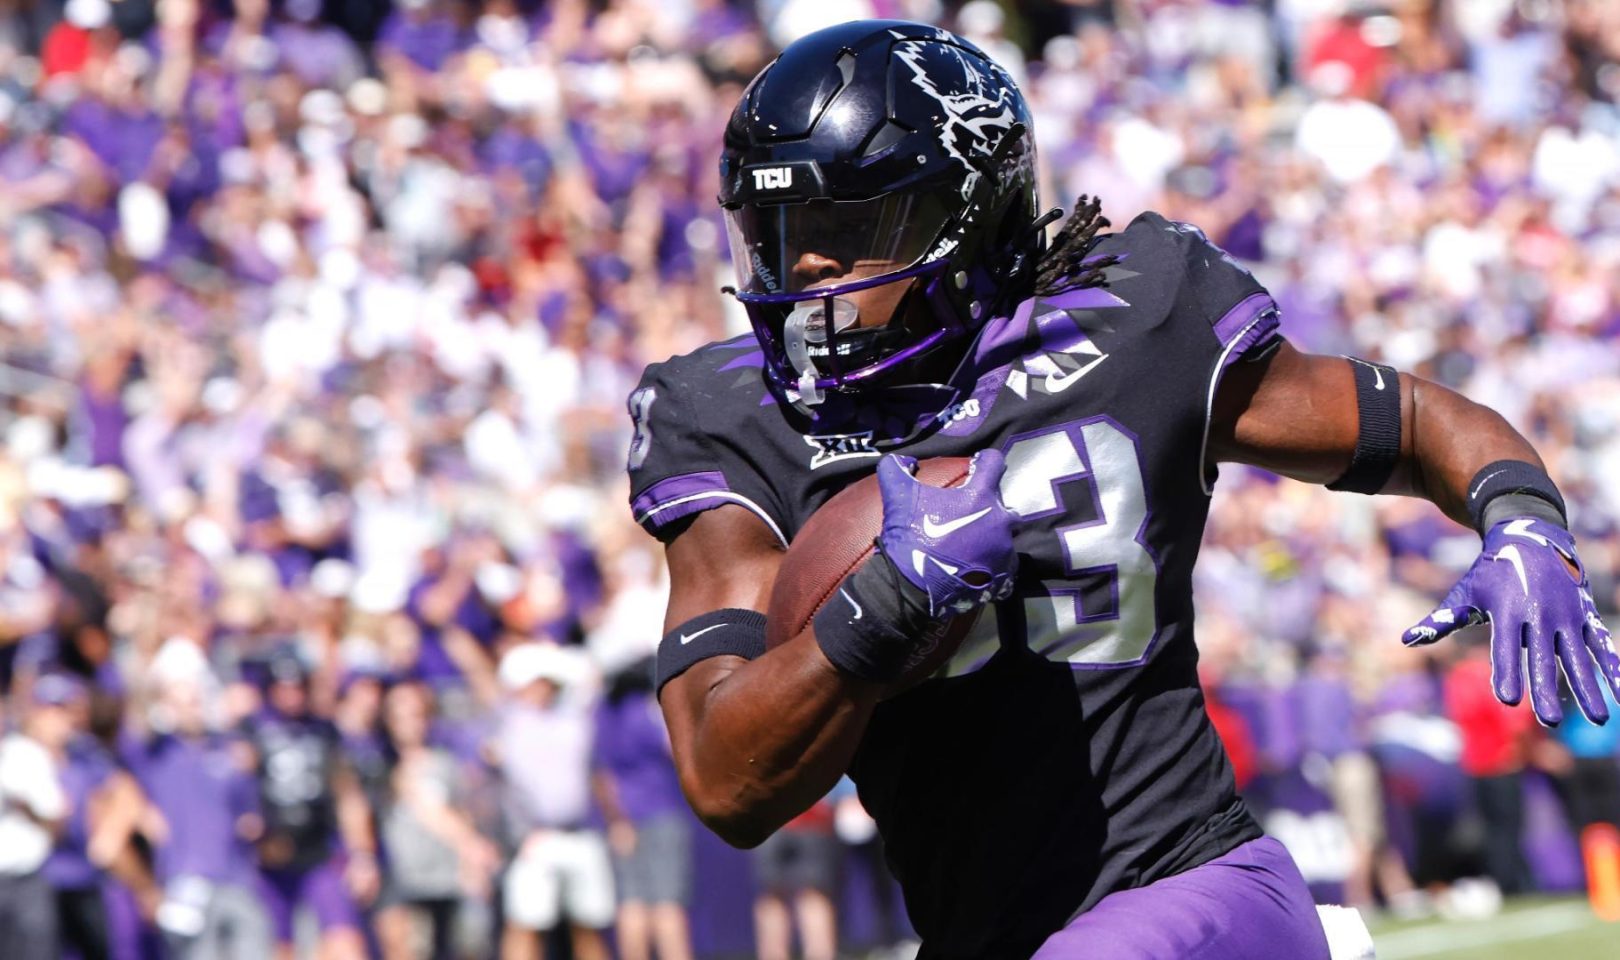 WVU faces a "hard tackle" in TCU running back Kendre Miller Dominion Post